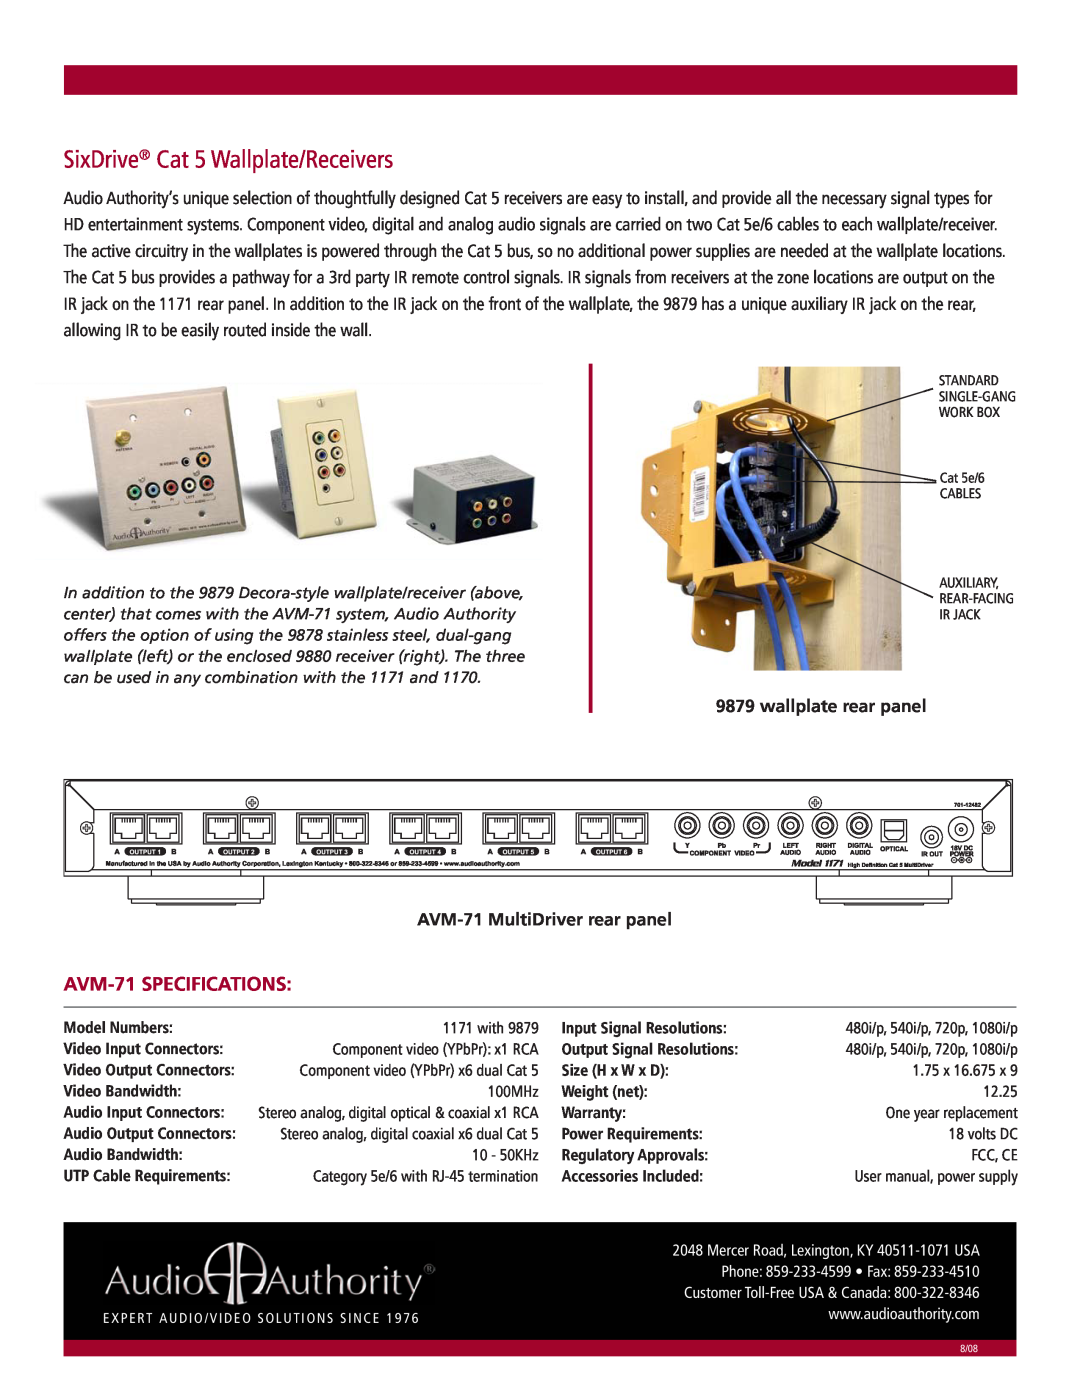 Audio Authority manual SixDrive Cat 5 Wallplate/Receivers, AVM-71SPECIFICATIONS, wallplate rear panel 